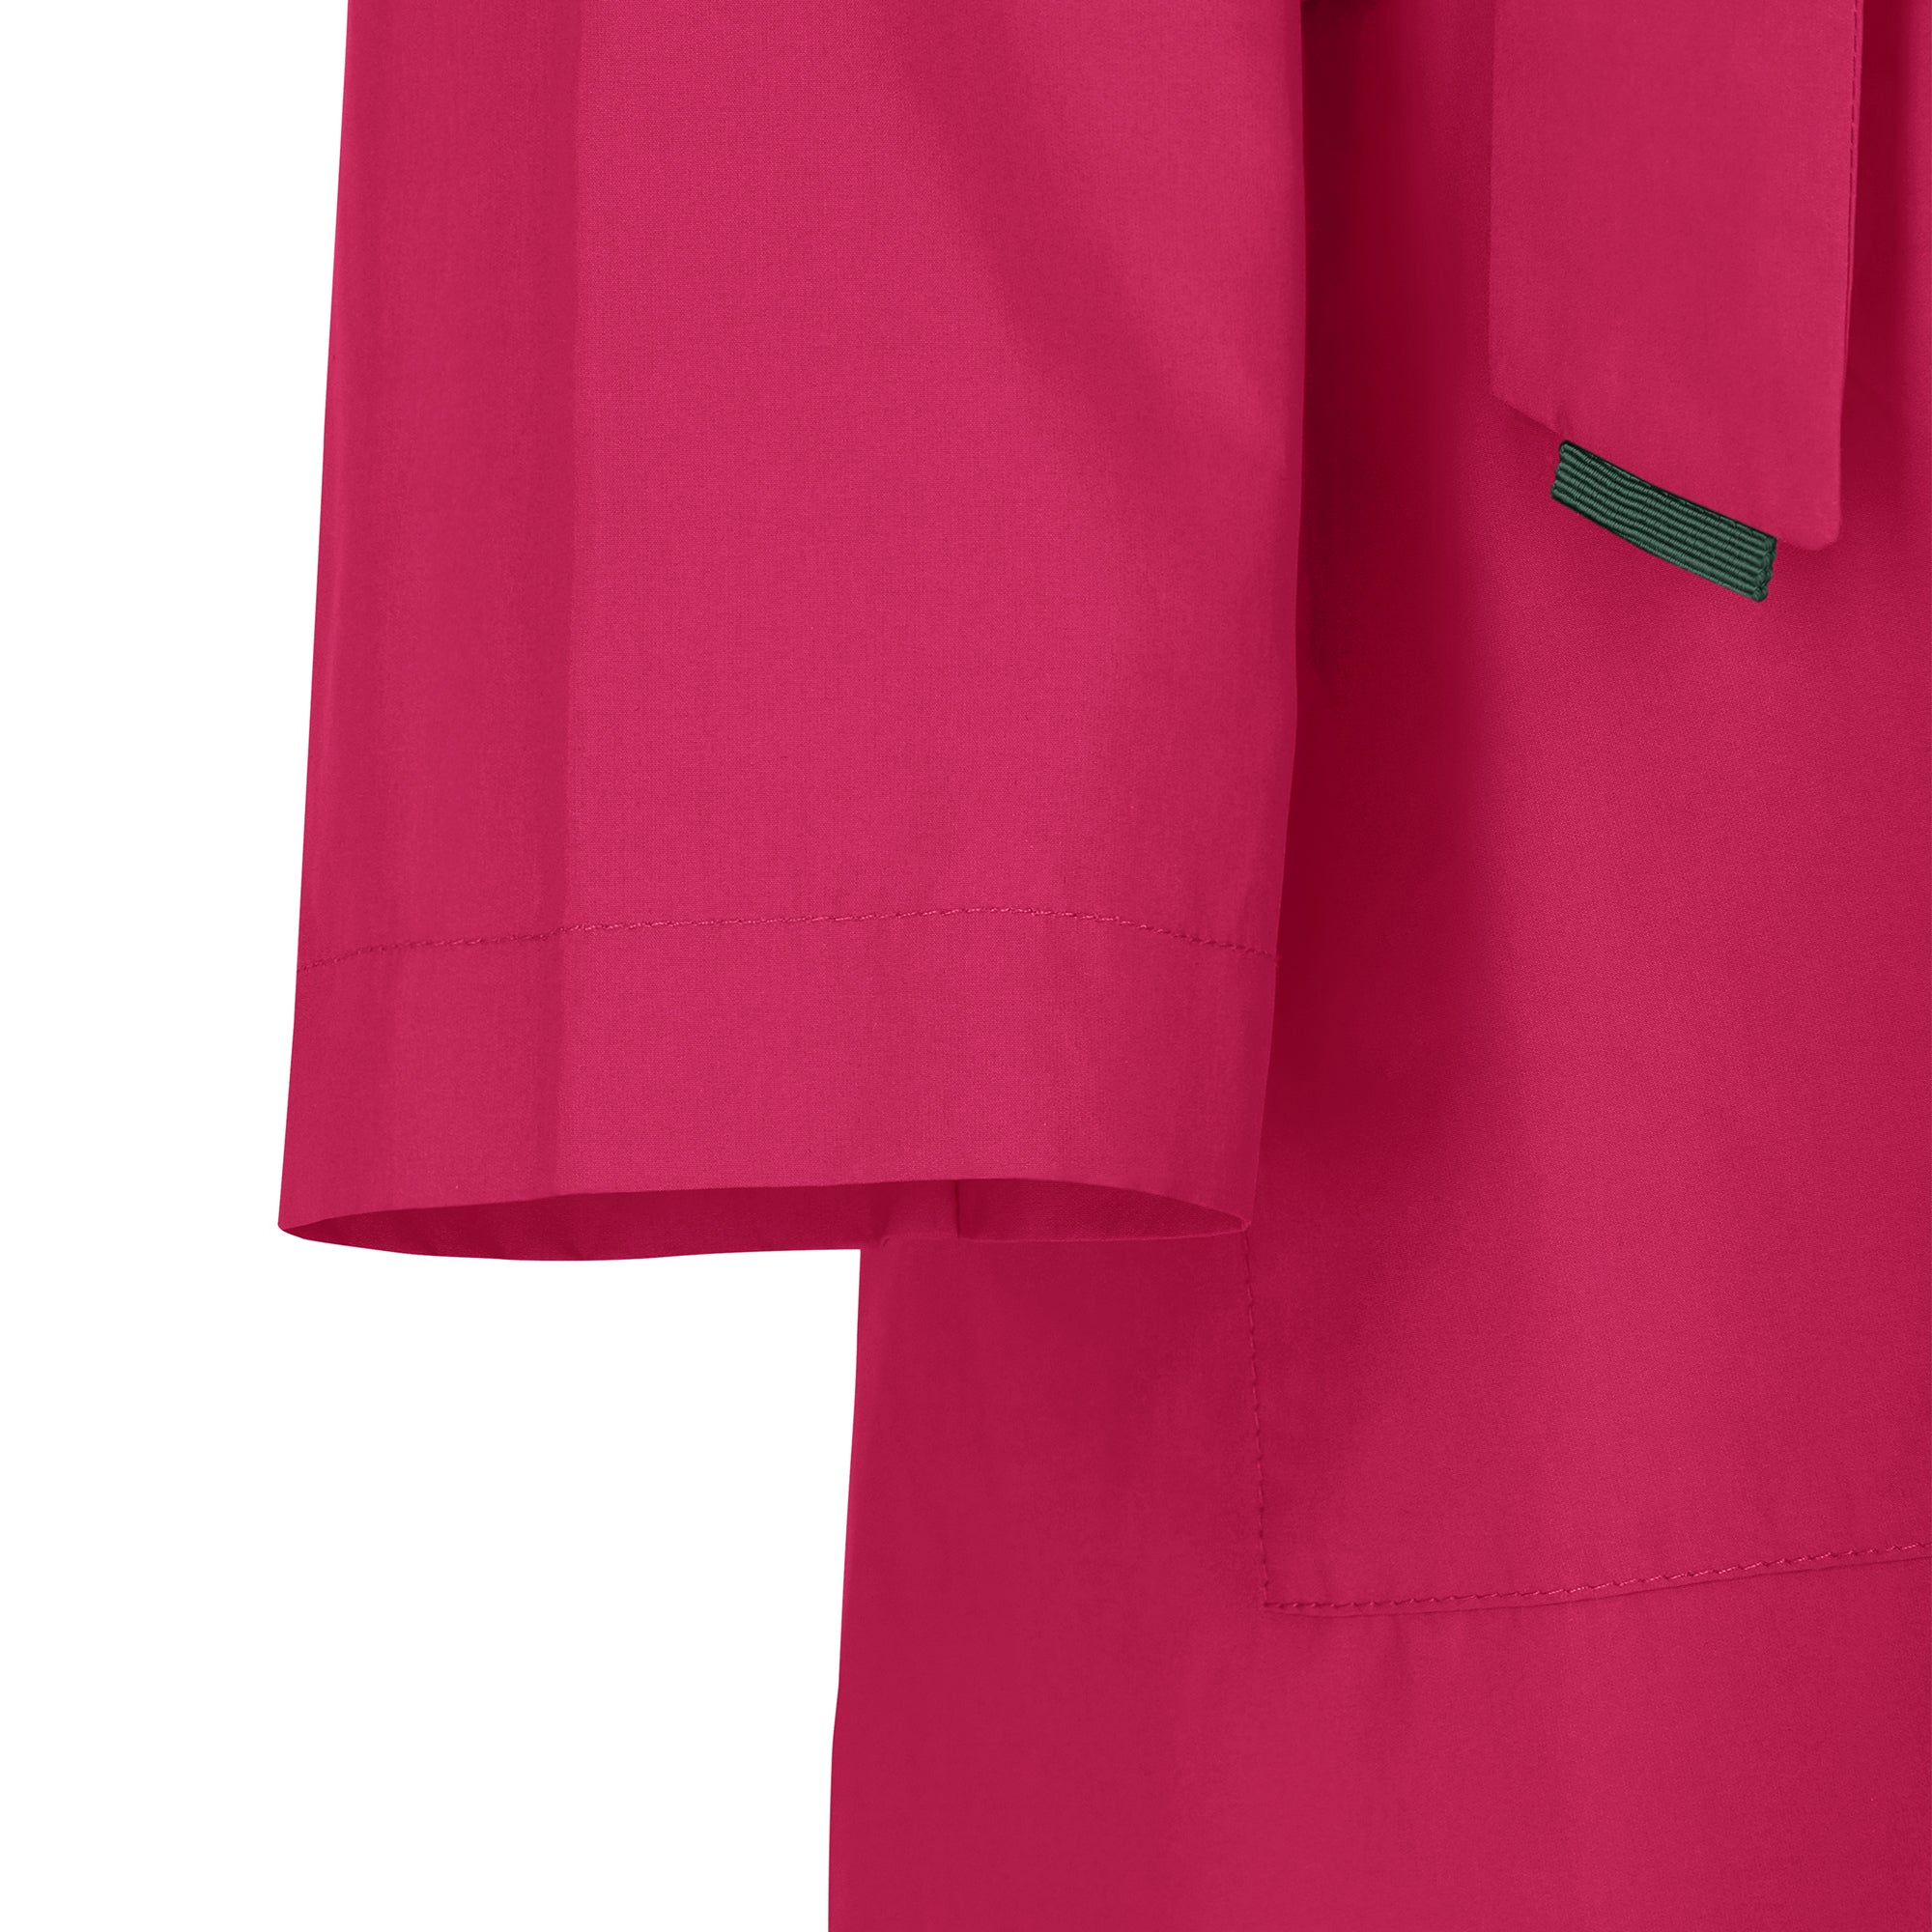 The classic raincoat - cherry color - sleeve detail